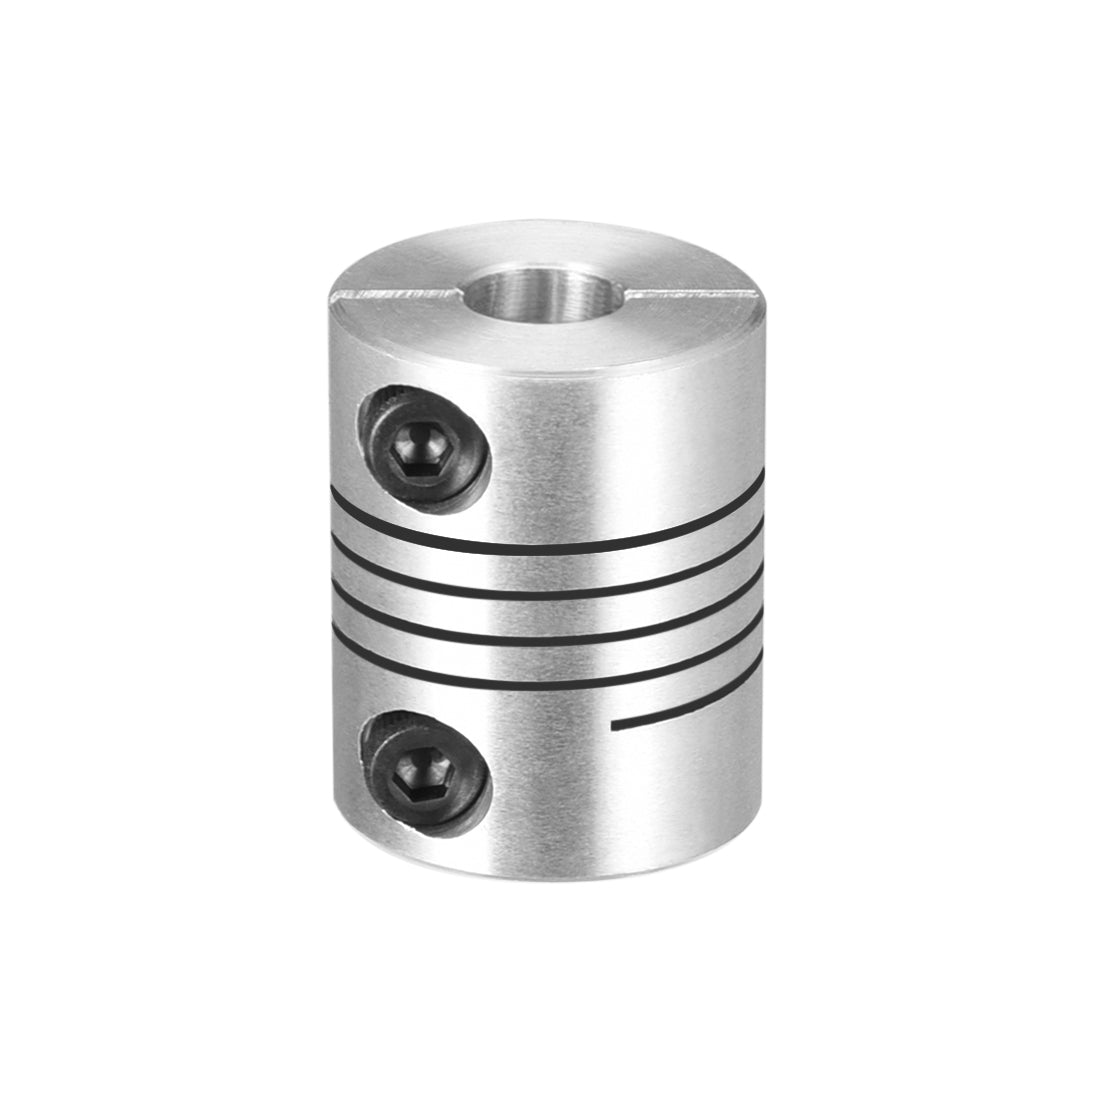 uxcell Uxcell Motor Shaft 6mm to 8mm Helical Beam Coupler Coupling 20mm Dia 25mm Length